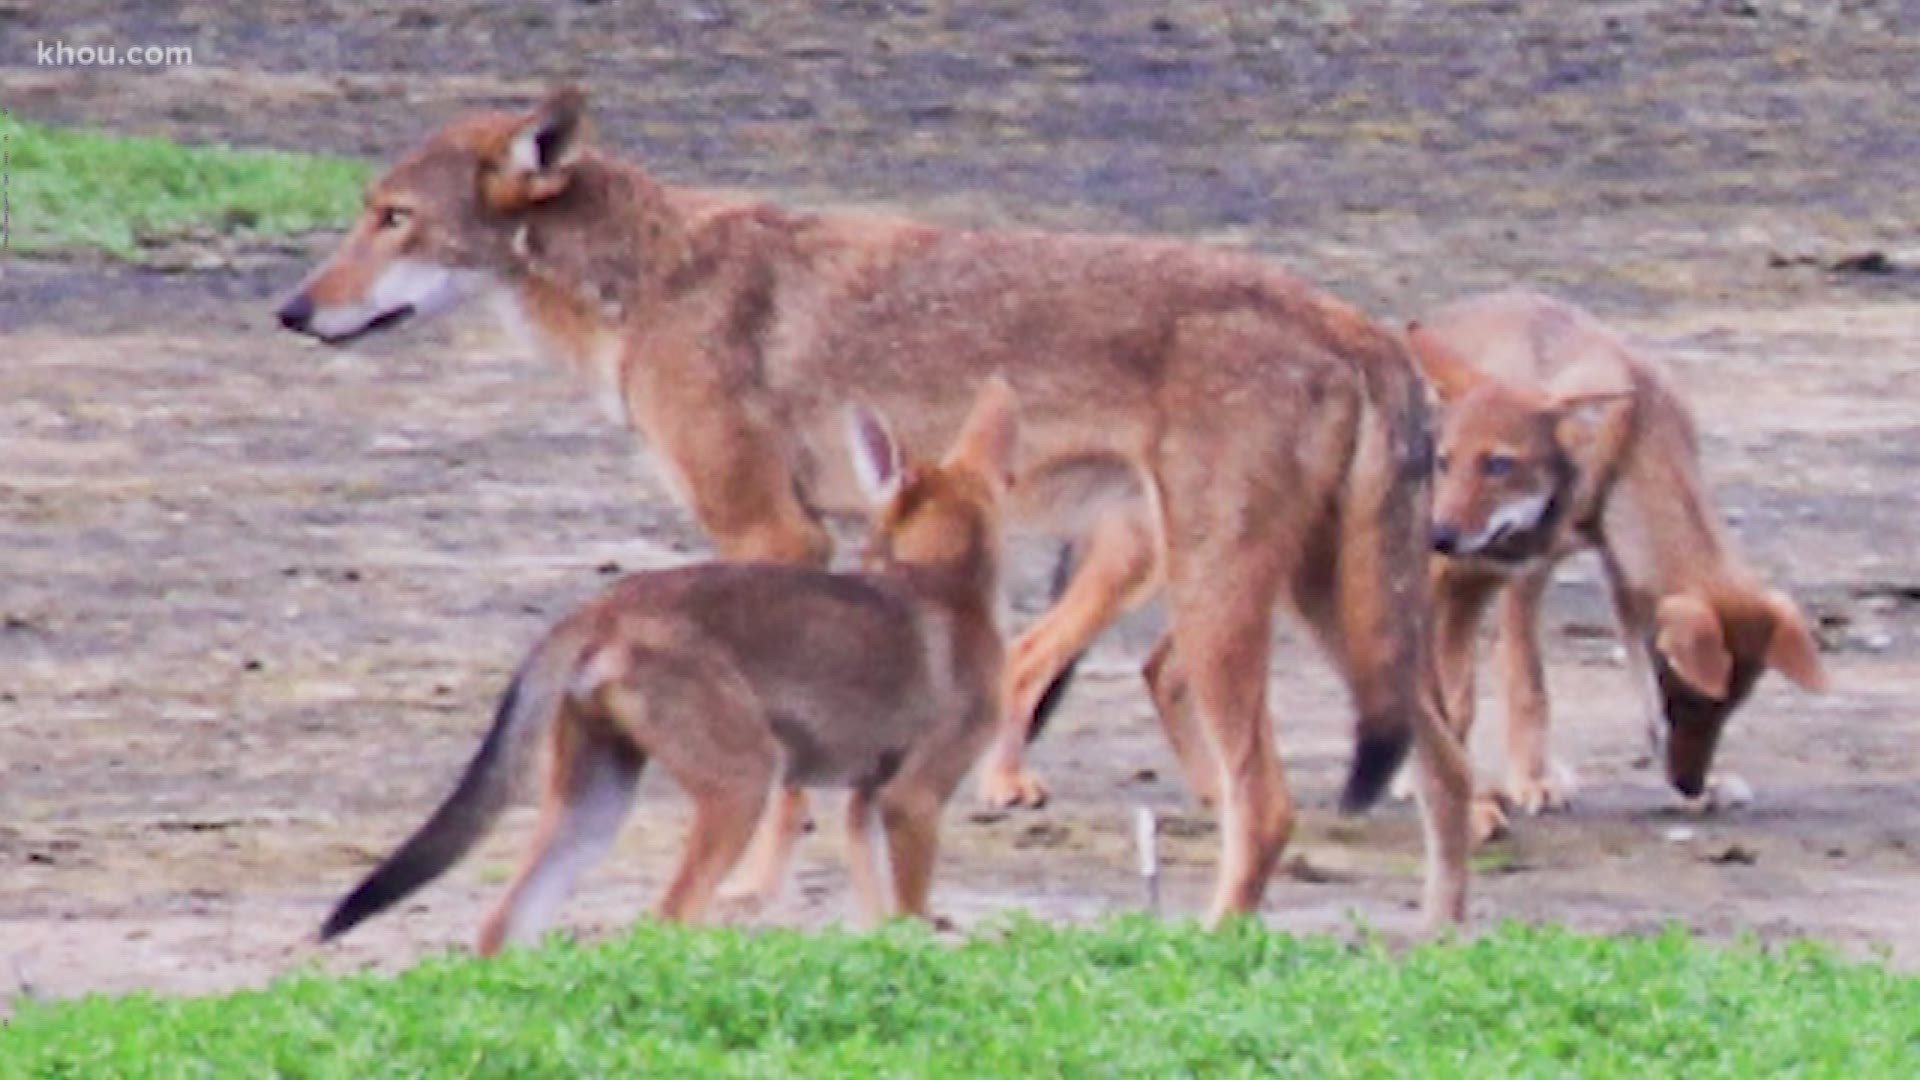 Researchers say a pack of wild canines found frolicking near the beaches of the Texas Gulf Coast carries a substantial amount of red wolf genes, a surprising discovery because the animal was declared extinct in the wild nearly 40 years ago.